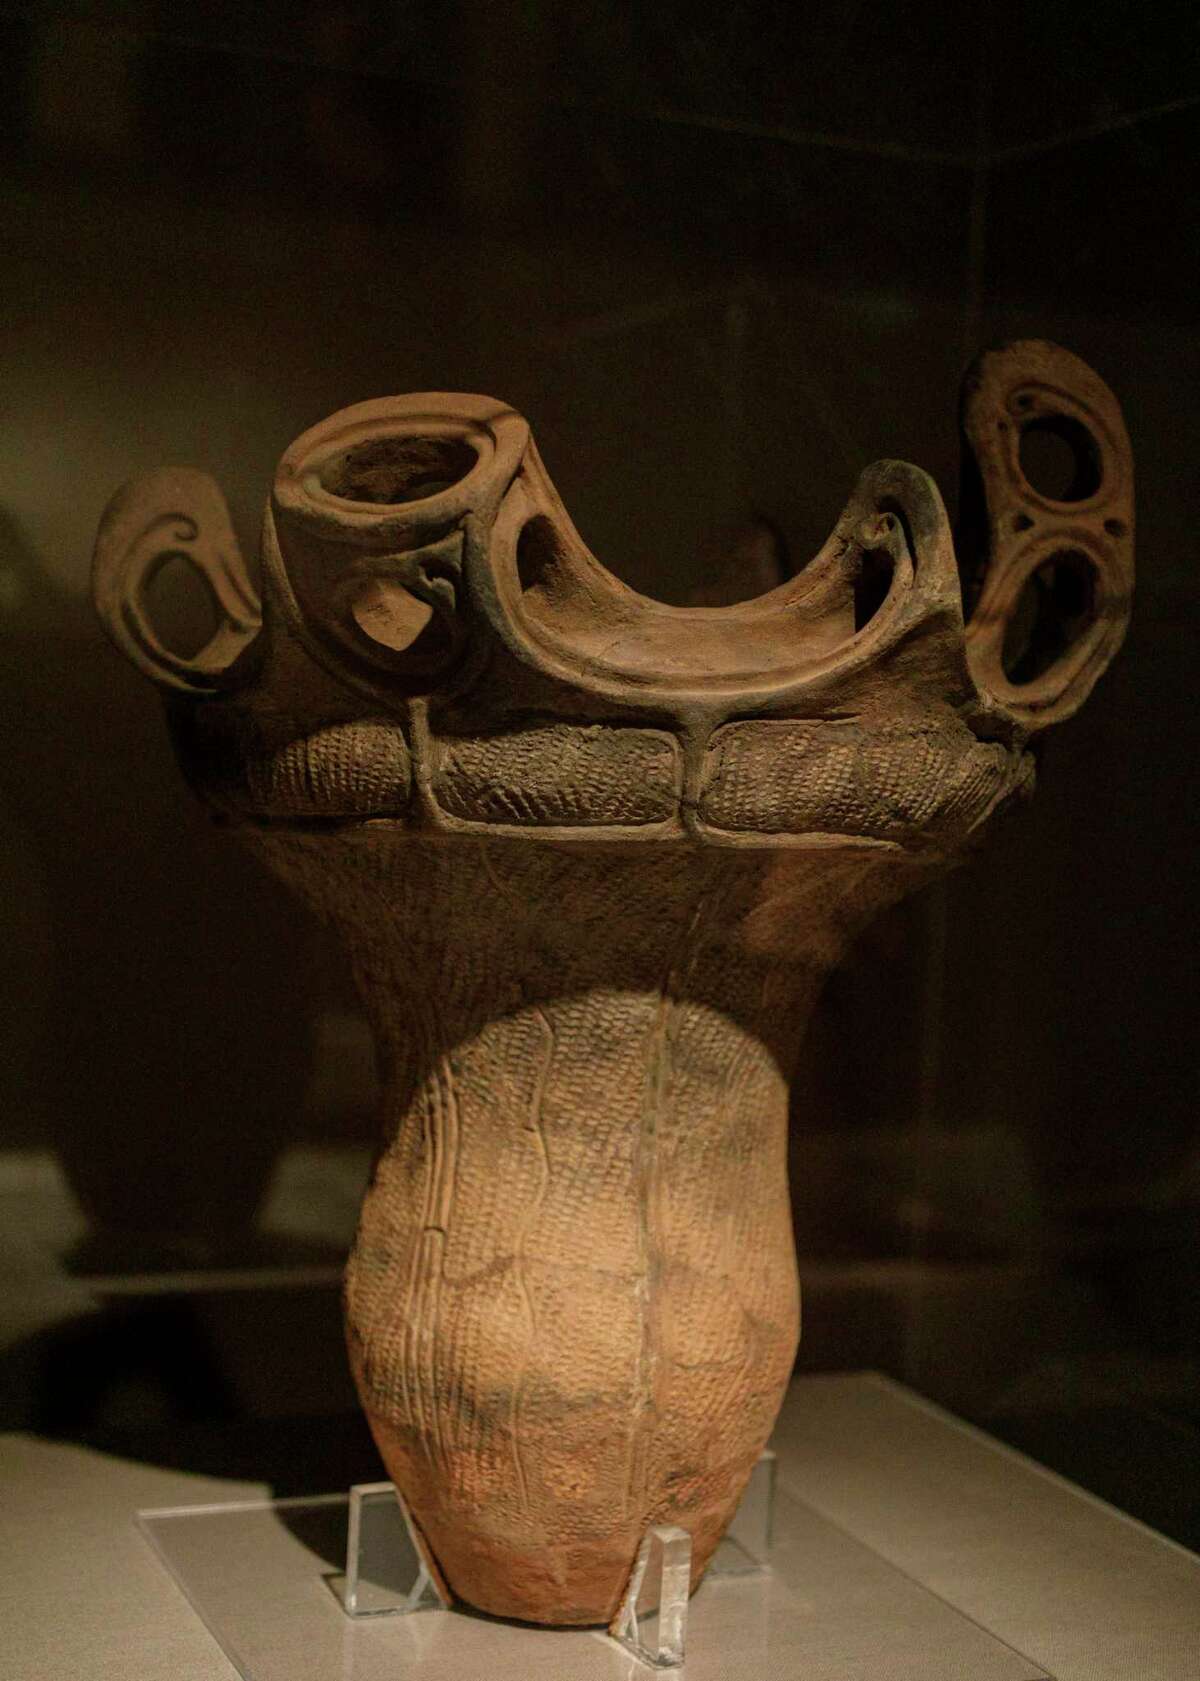 A Japanese earthenware jar from the Jomon Period, 3000-2000 BC, is on display for visitors to look at in the Japanese art gallery at the San Antonio Museum of Art in San Antonio, Texas, Friday, Oct. 1, 2021. The jar was purchased with funds provided by the Lenora and Walter F. Brown Asian Art Challenge Fund.